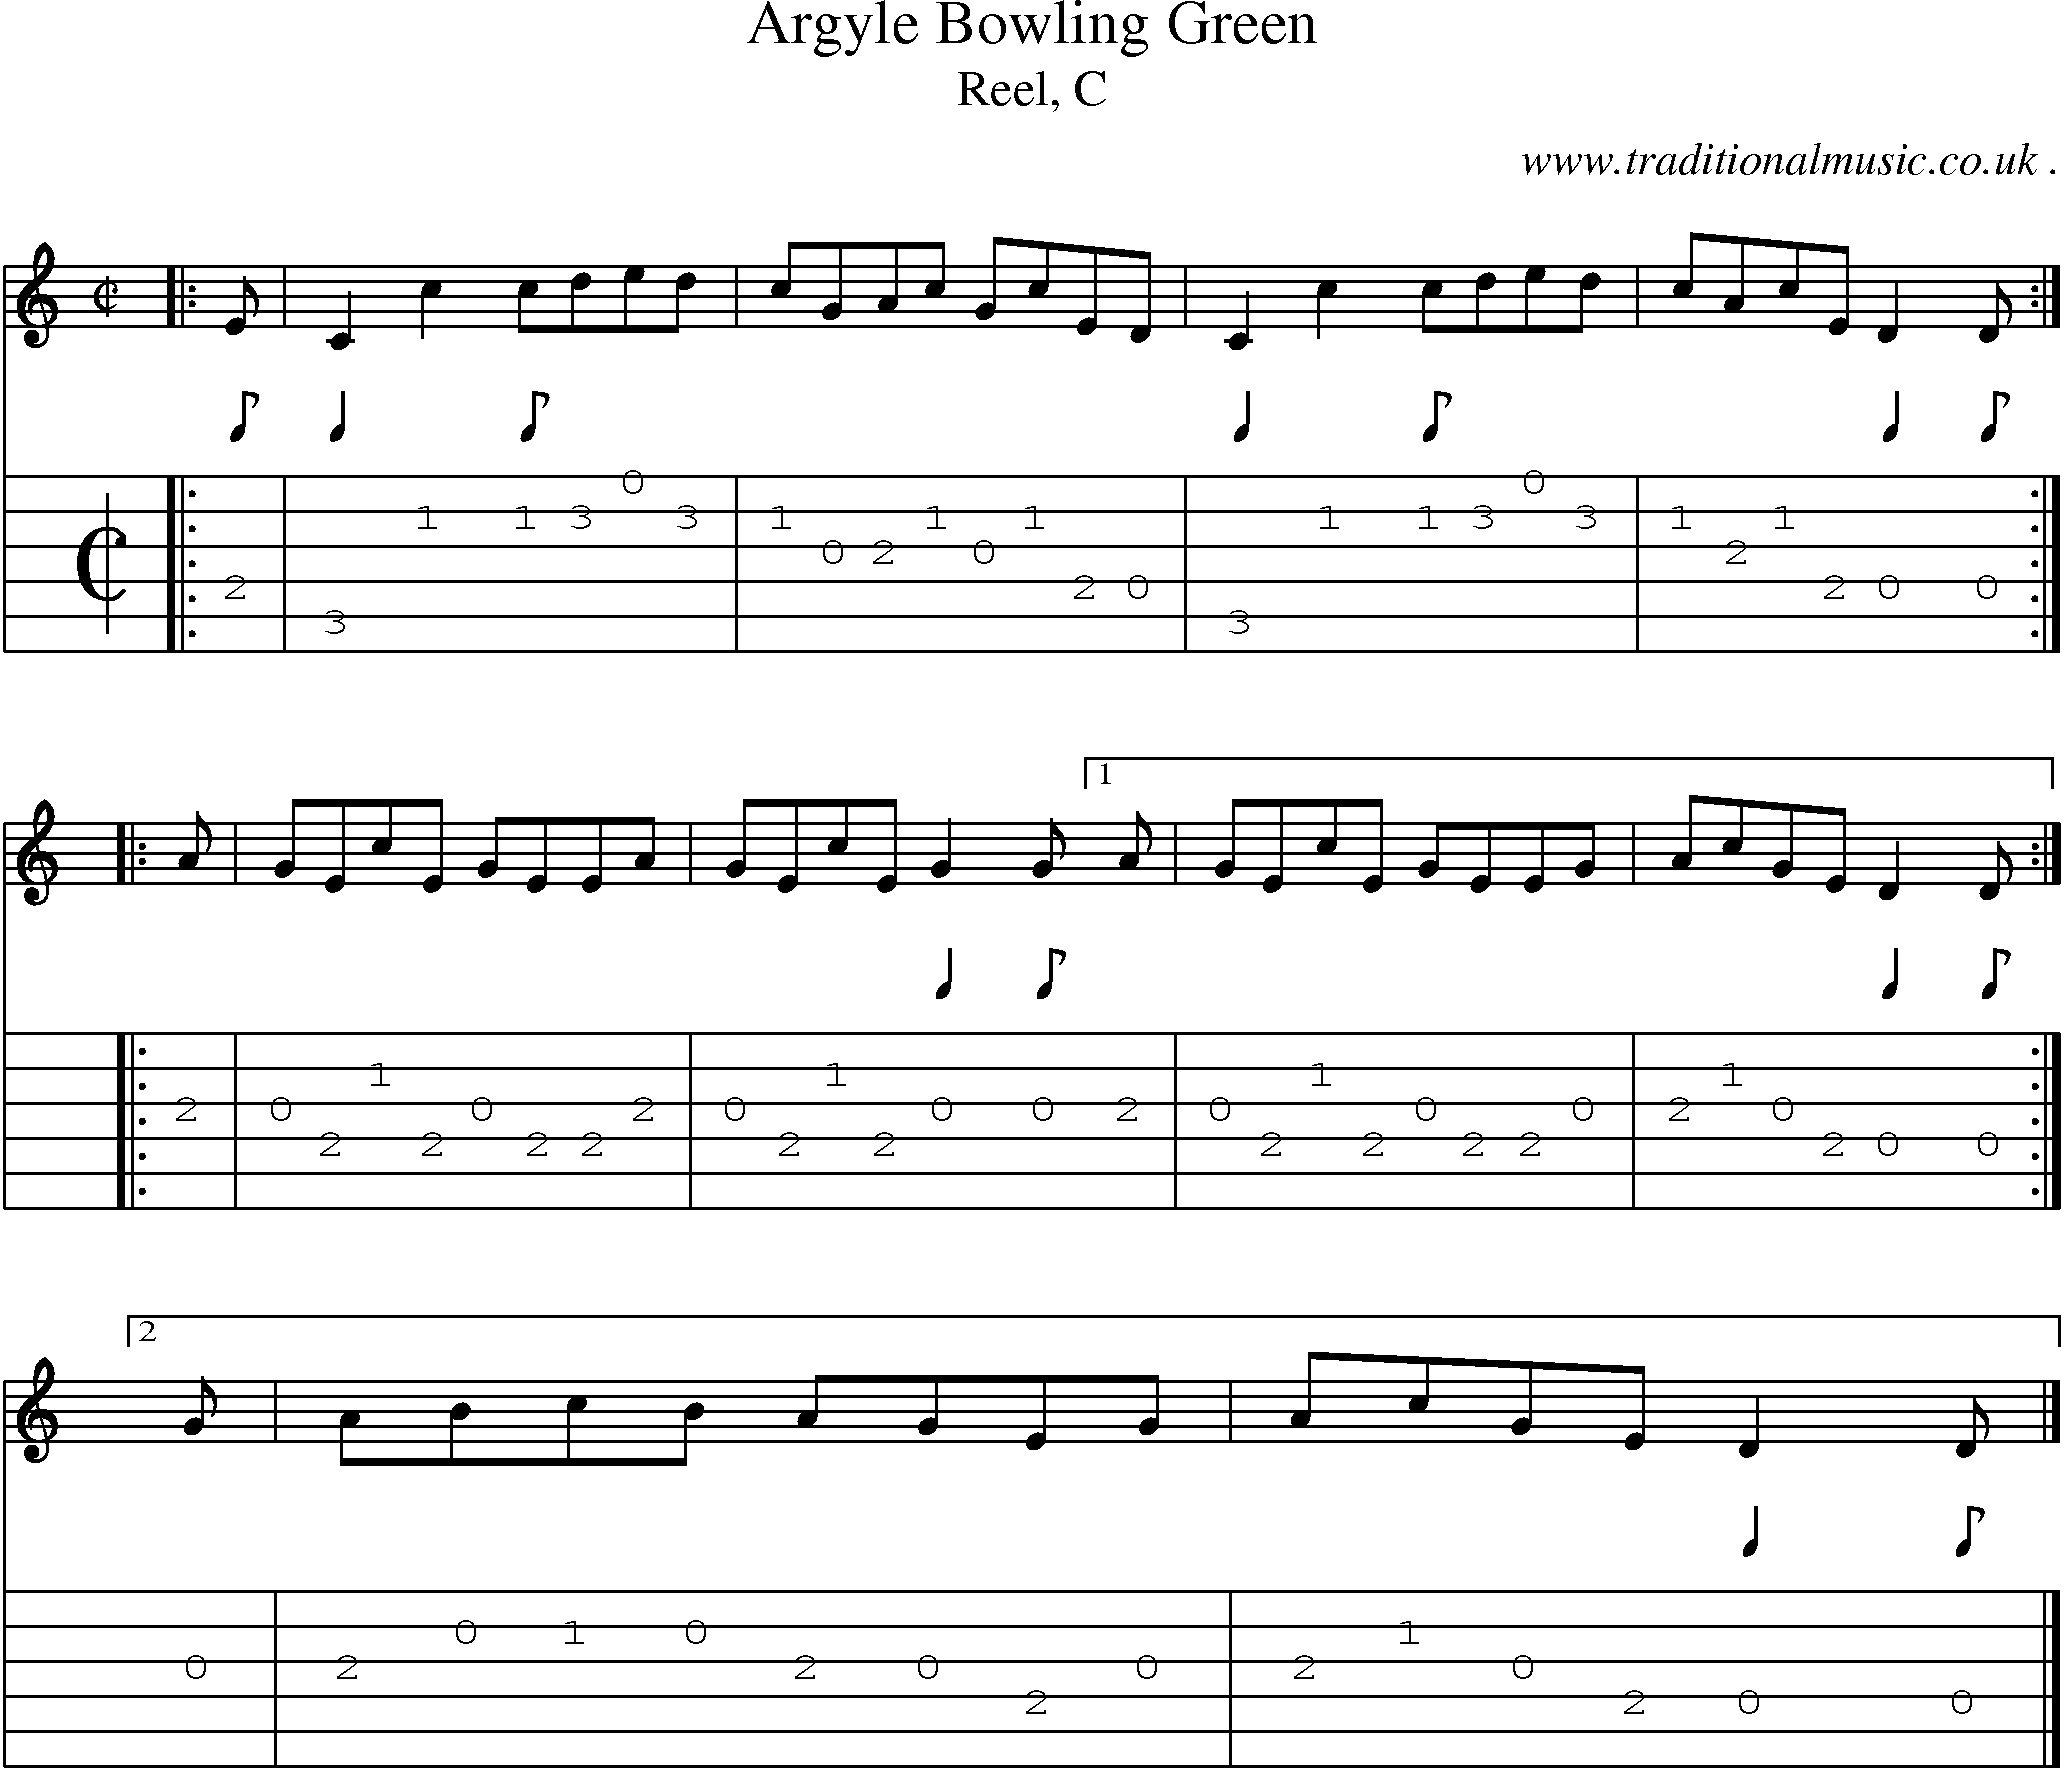 Sheet-music  score, Chords and Guitar Tabs for Argyle Bowling Green